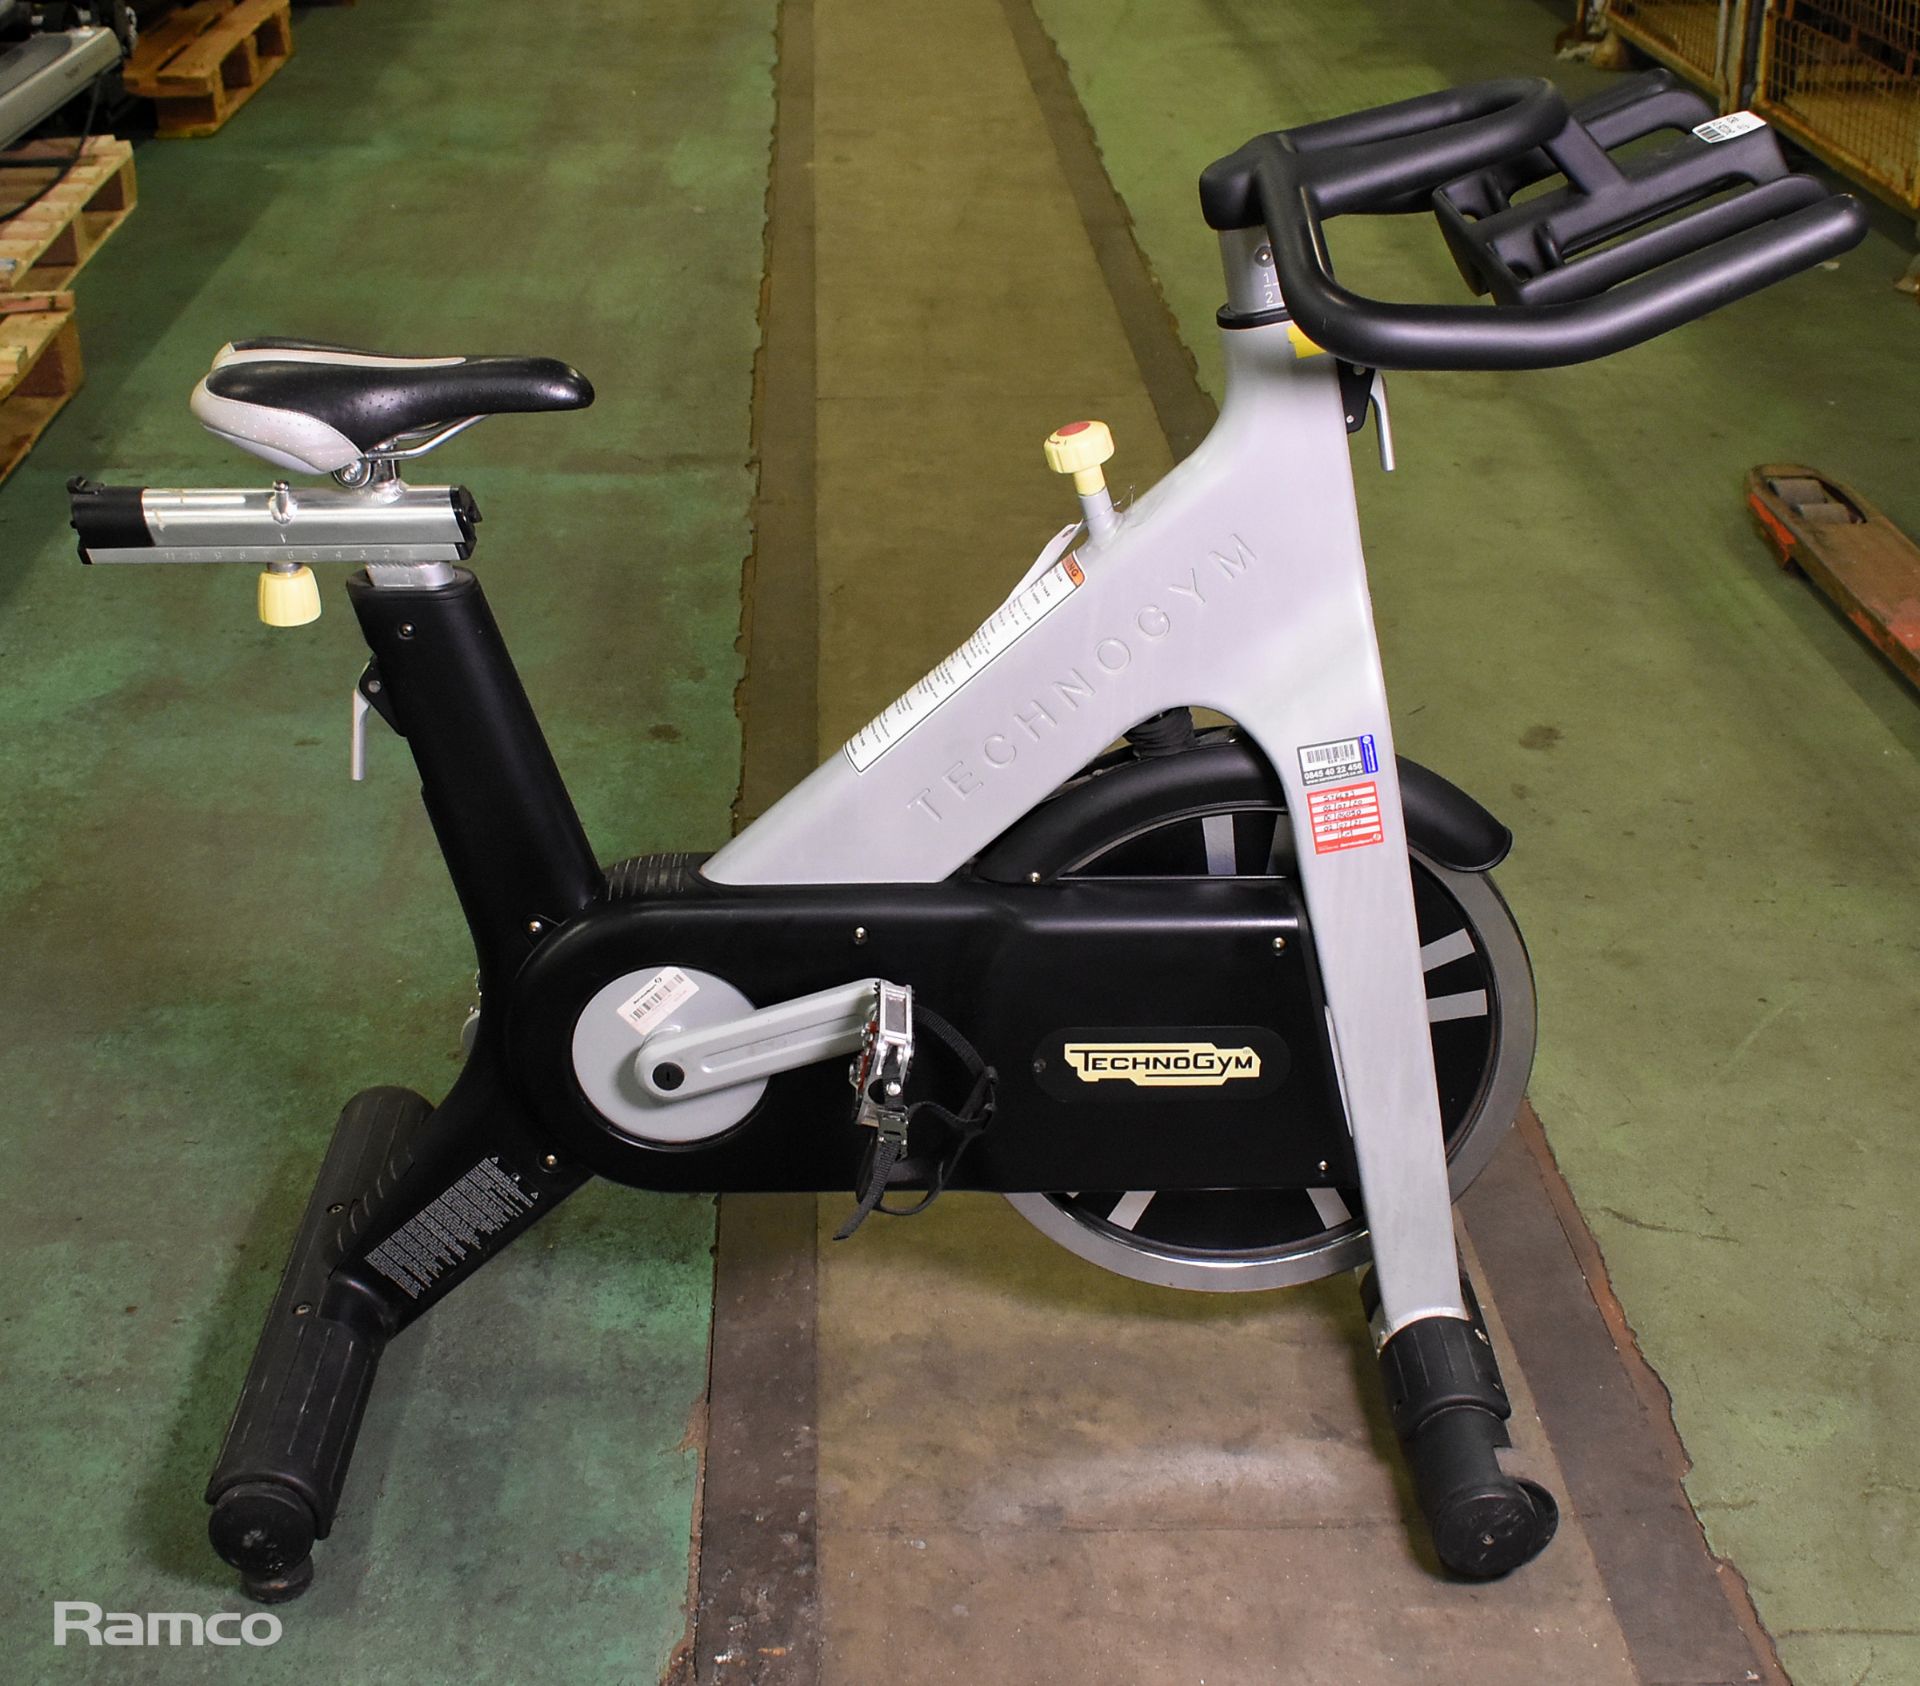 3x TechnoGym Group cycle spinning bikes - Image 17 of 23